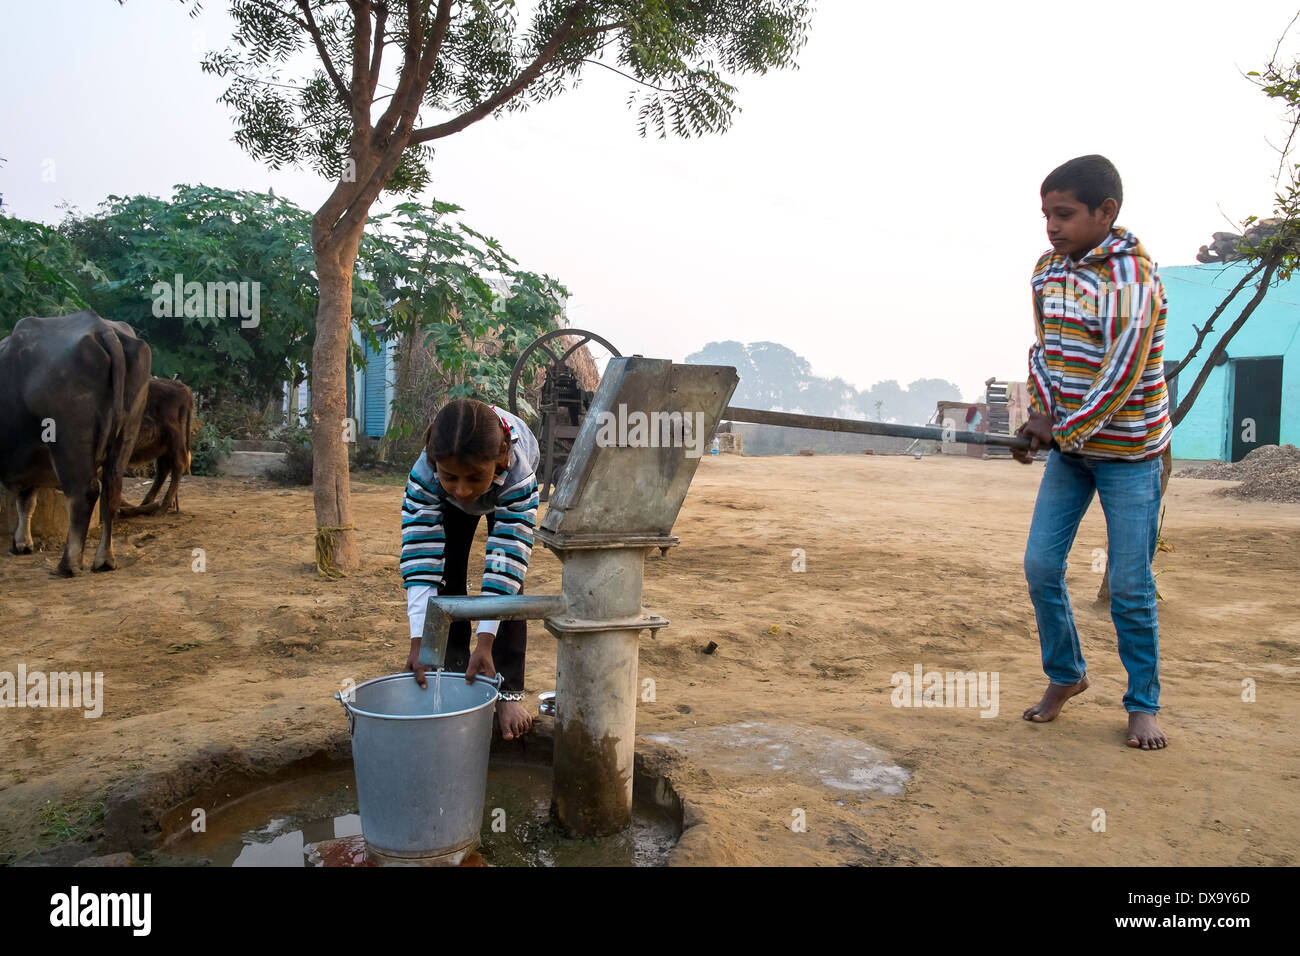 India, Uttar Pradesh, Agra, young girl and boy drawing water from village home pump Stock Photo